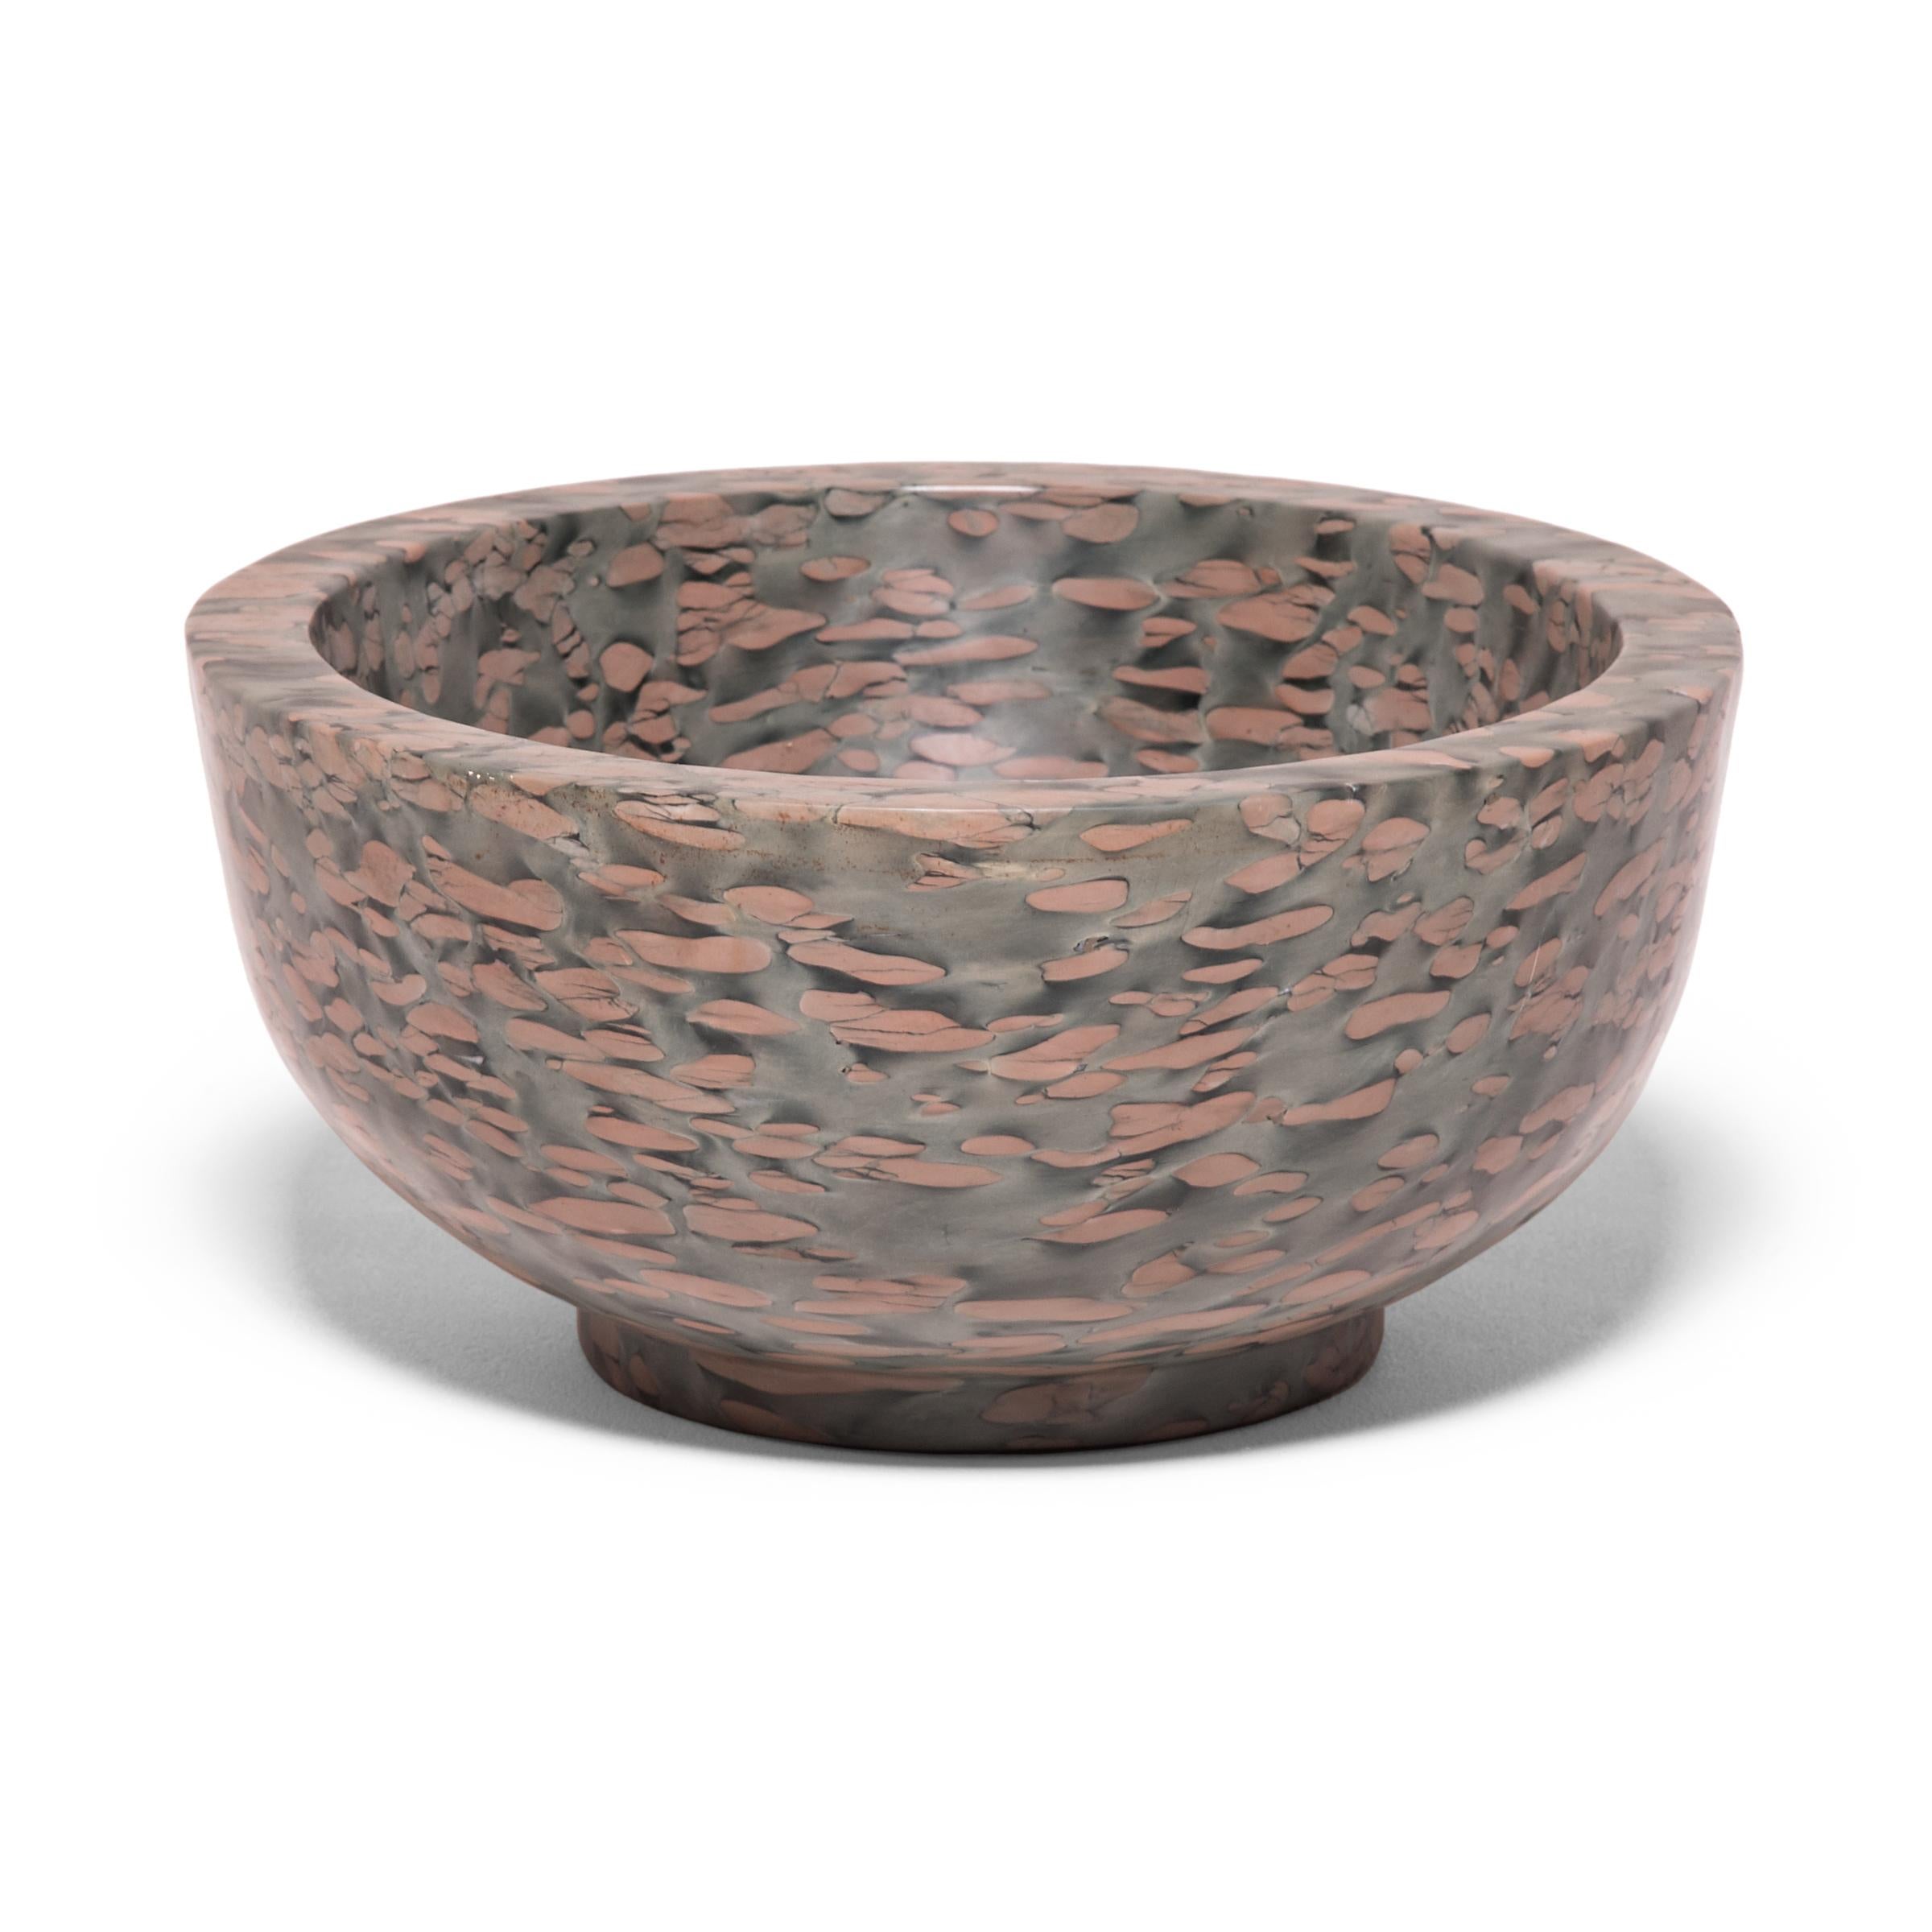 A clean-lined interpretation of an ancient form, this footed basin was hand-carved by artisans in China's Shandong province. The mesmerizing pattern of zhenzhu is inherent to the stone, a conglomerate limestone extracted from Lake Tai in Jiangsu